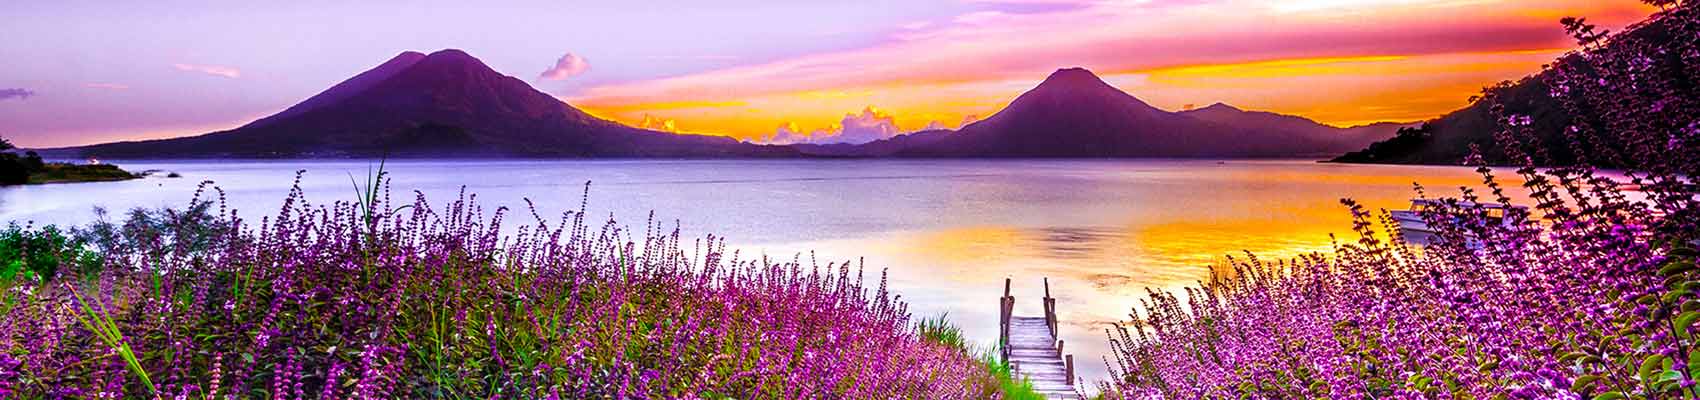 Sunset over a lakeside field of lavender.